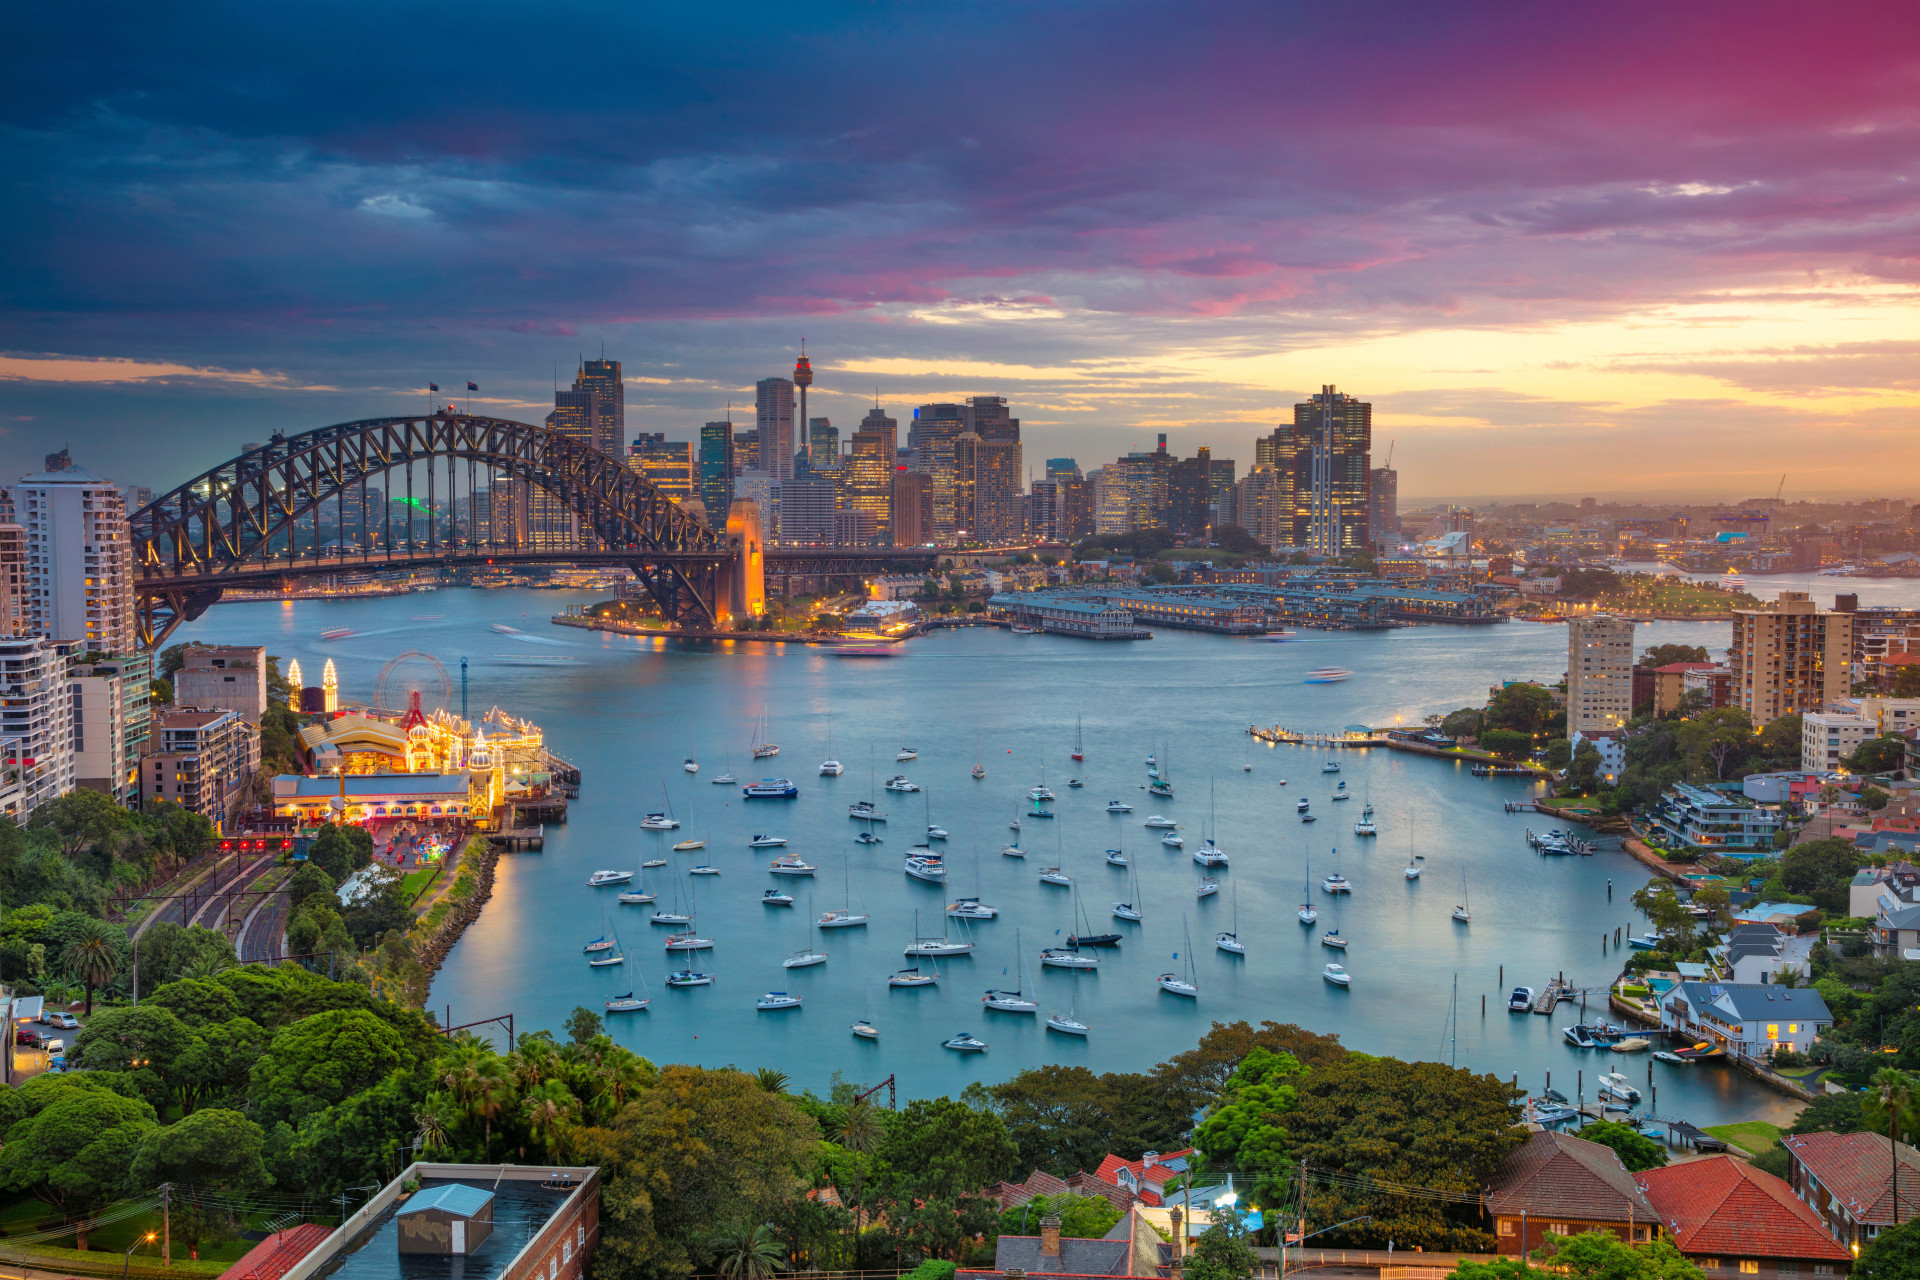 Sydney is one of the main tourist spots in Australia. The city is also a favorite among language exchange students.<p>You may also like:<a href="https://www.starsinsider.com/n/393469?utm_source=msn.com&utm_medium=display&utm_campaign=referral_description&utm_content=210974v3en-ae"> Strangest pre-game rituals in professional sports</a></p>